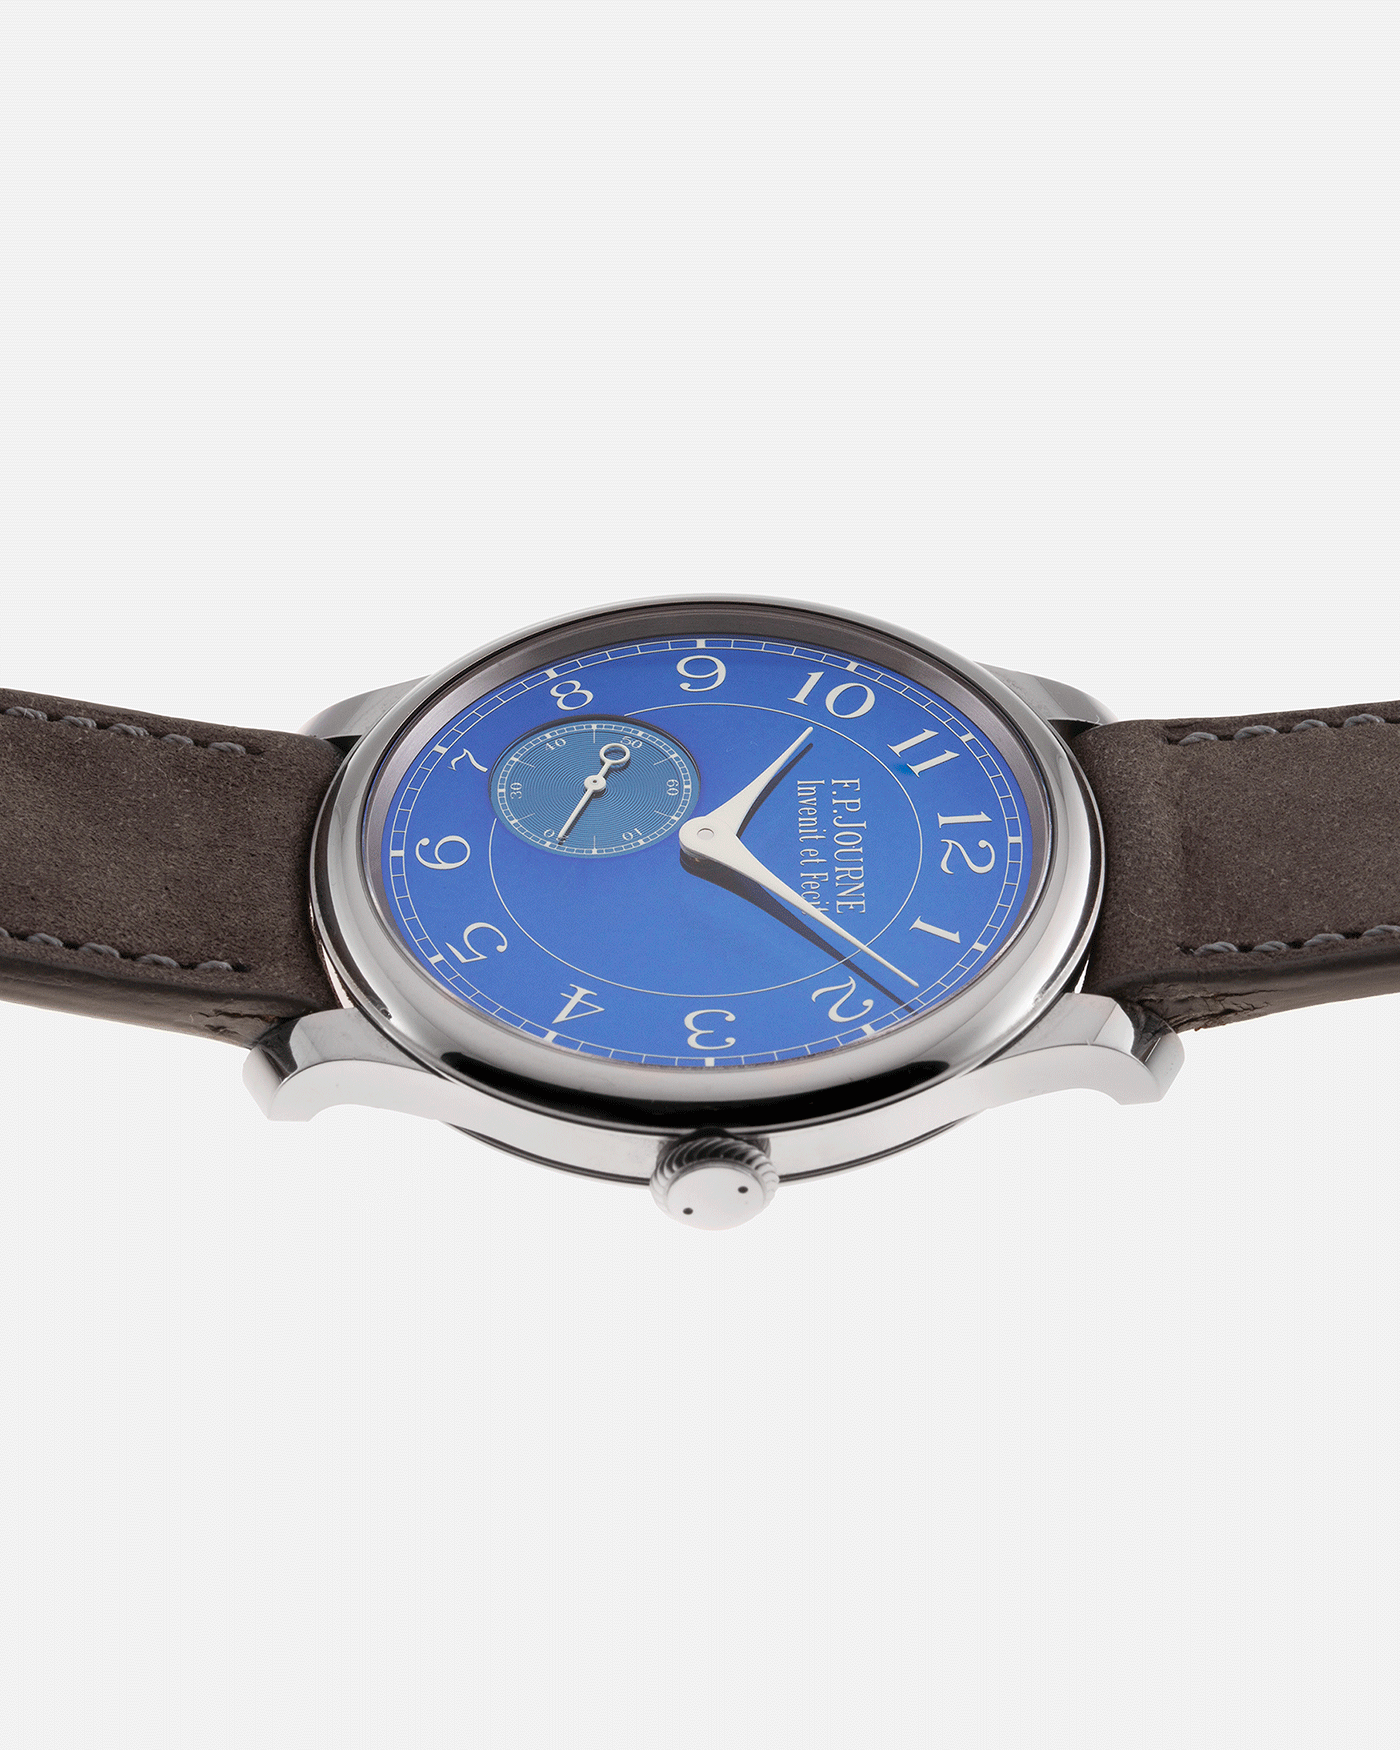 Brand: F.P. Journe Year: 2016 Model: Chronometre Bleu Material: Tantalum Movement: in-house FPJ calibre 1304 Case Diameter: 39mm Bracelet/Strap: A Collected Man Grey Nubuck Strap and F.P. Journe Brown Alligator and Tantalum Tang Buckle